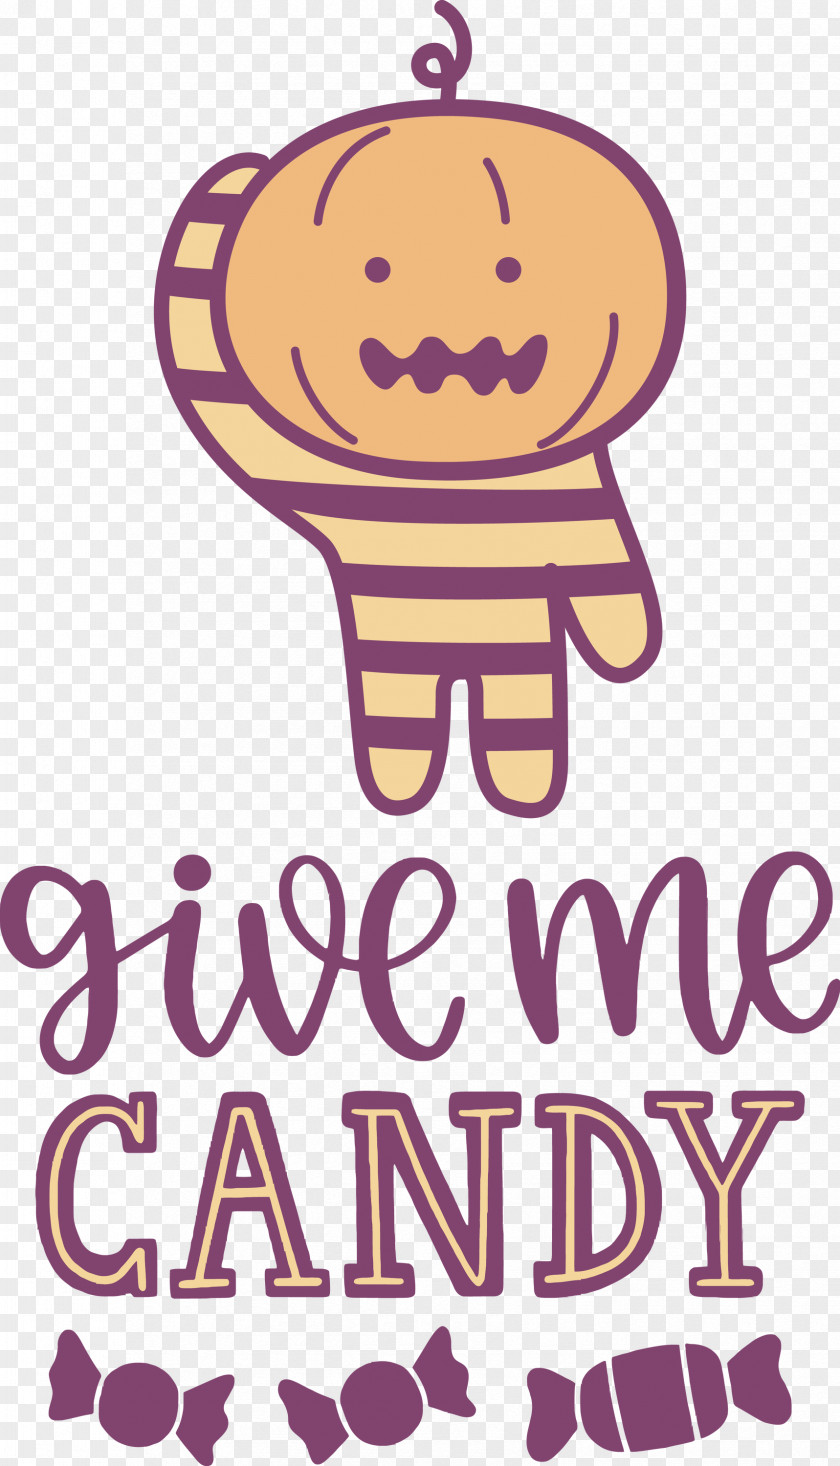 Give Me Candy Halloween Trick Or Treat PNG